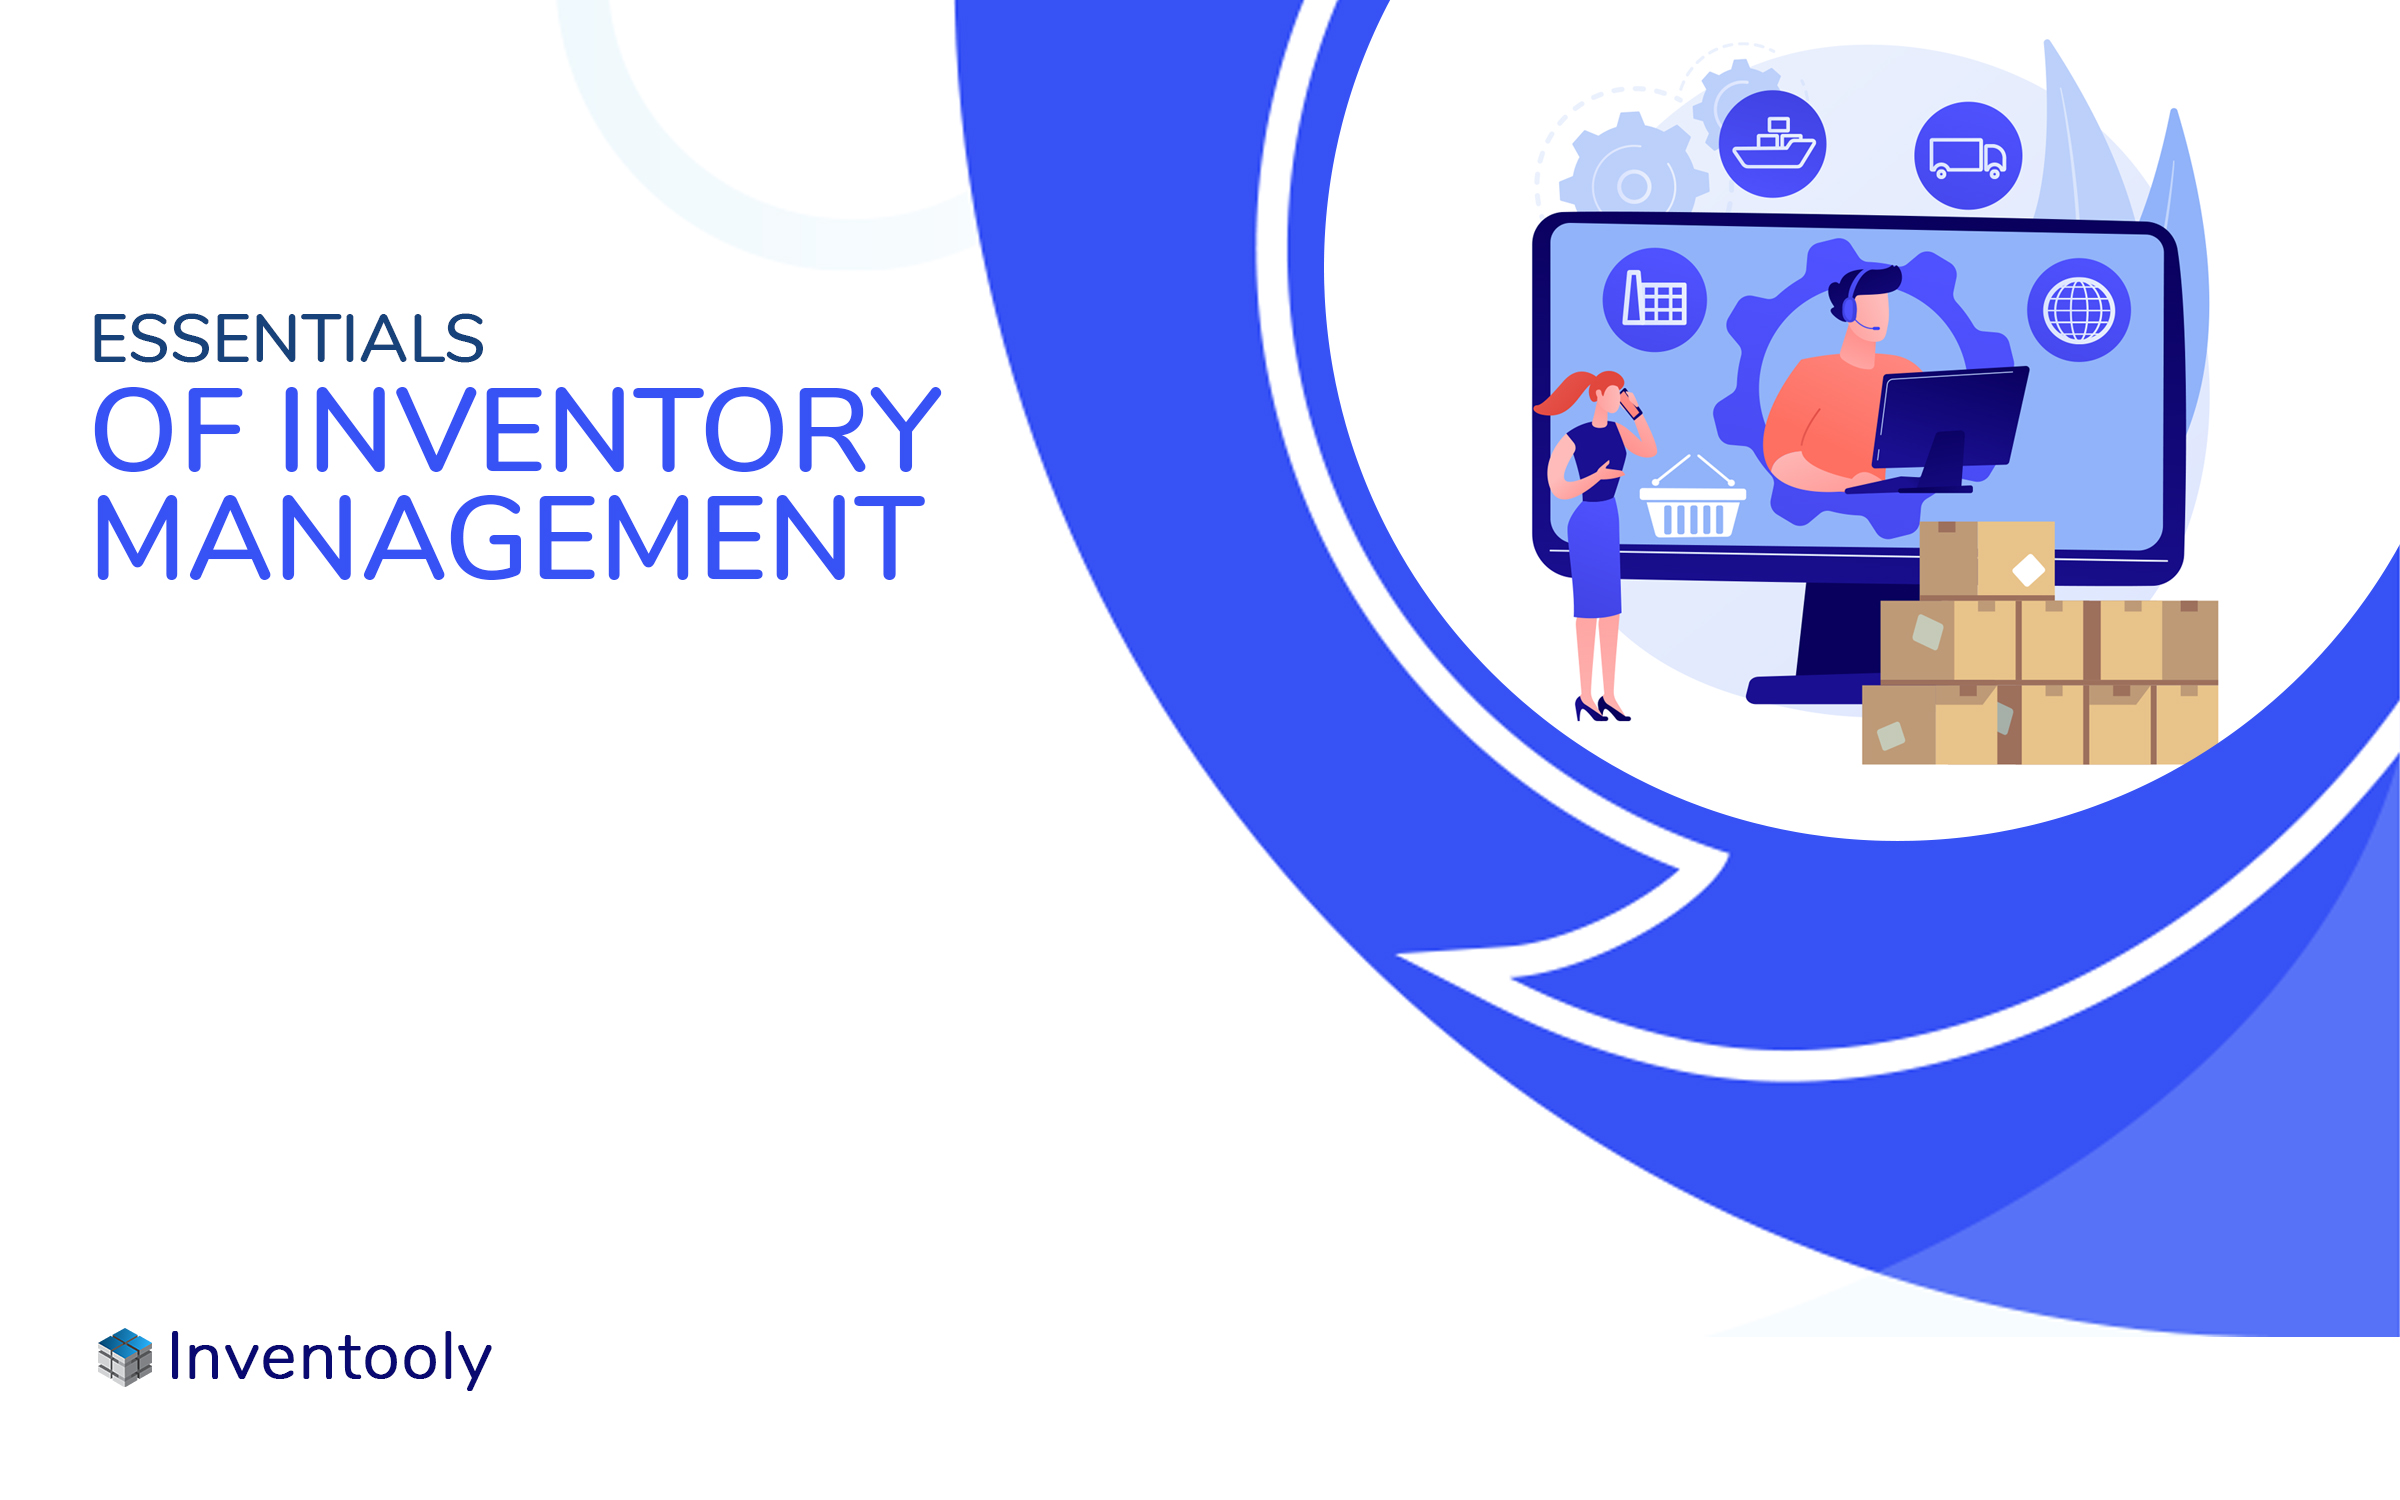 What are the Essentials of Inventory Management?